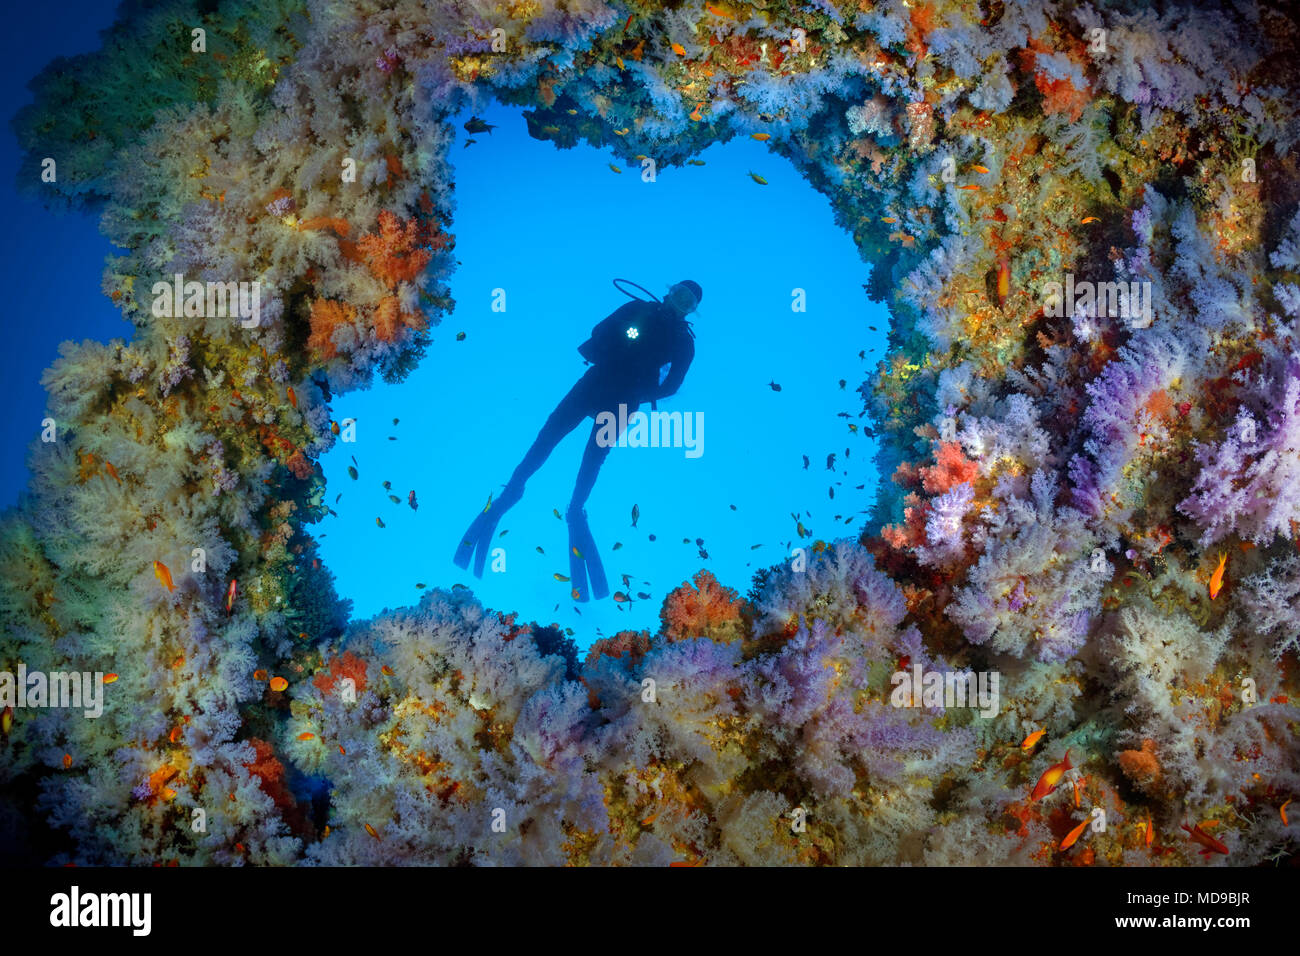 Diver, breakthrough in the overhang densely overgrown with soft corals (Alcyonacea), blue, hanging, Indian Ocean, Maldives Stock Photo